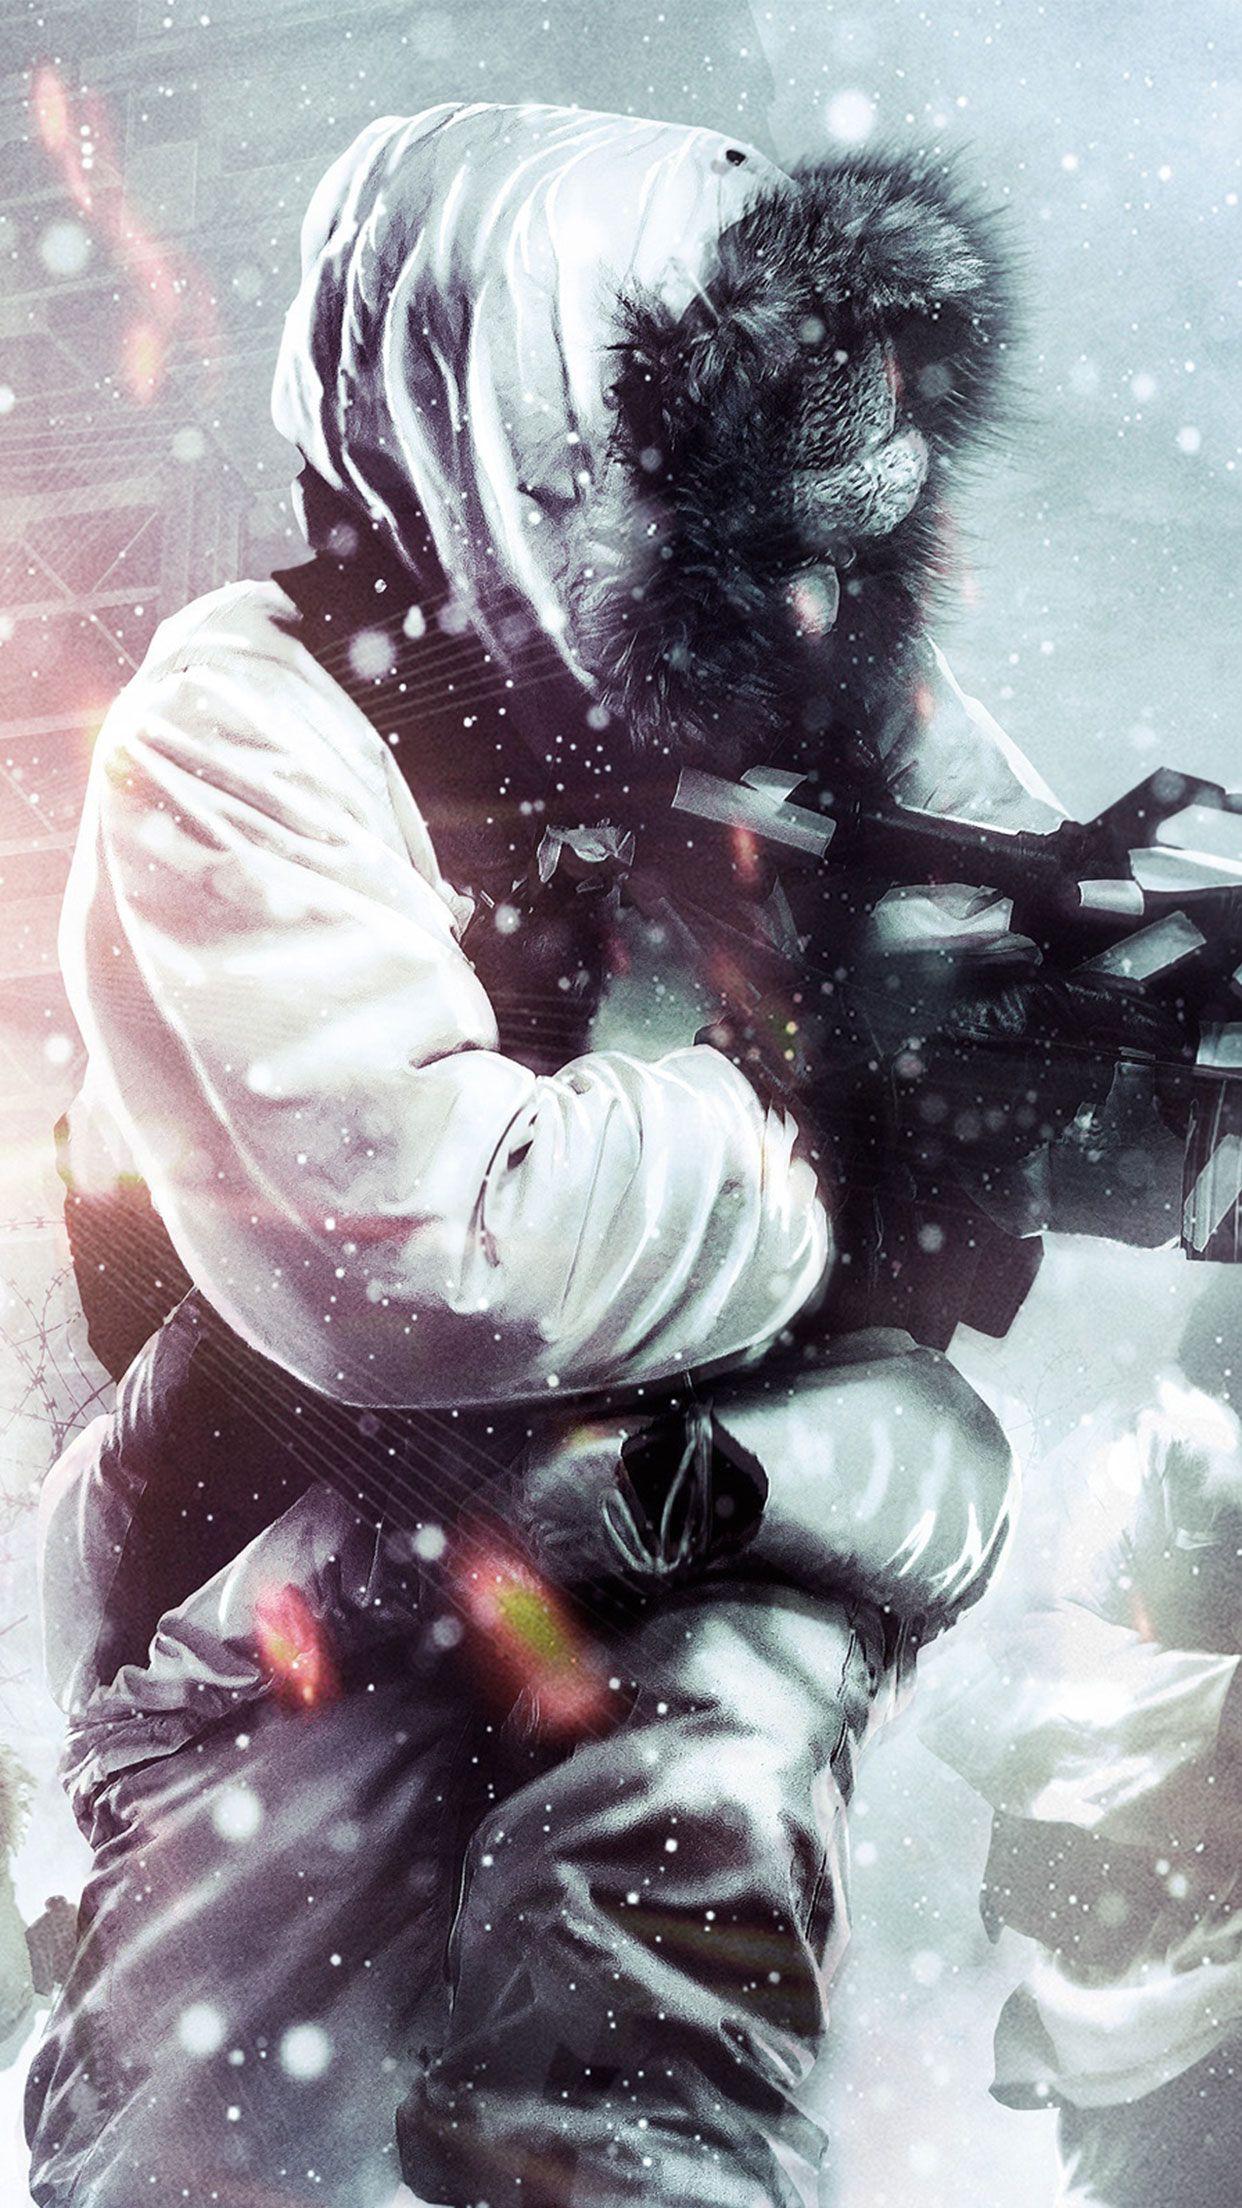 Call of duty: black ops game wallpaper for #iPhone #android